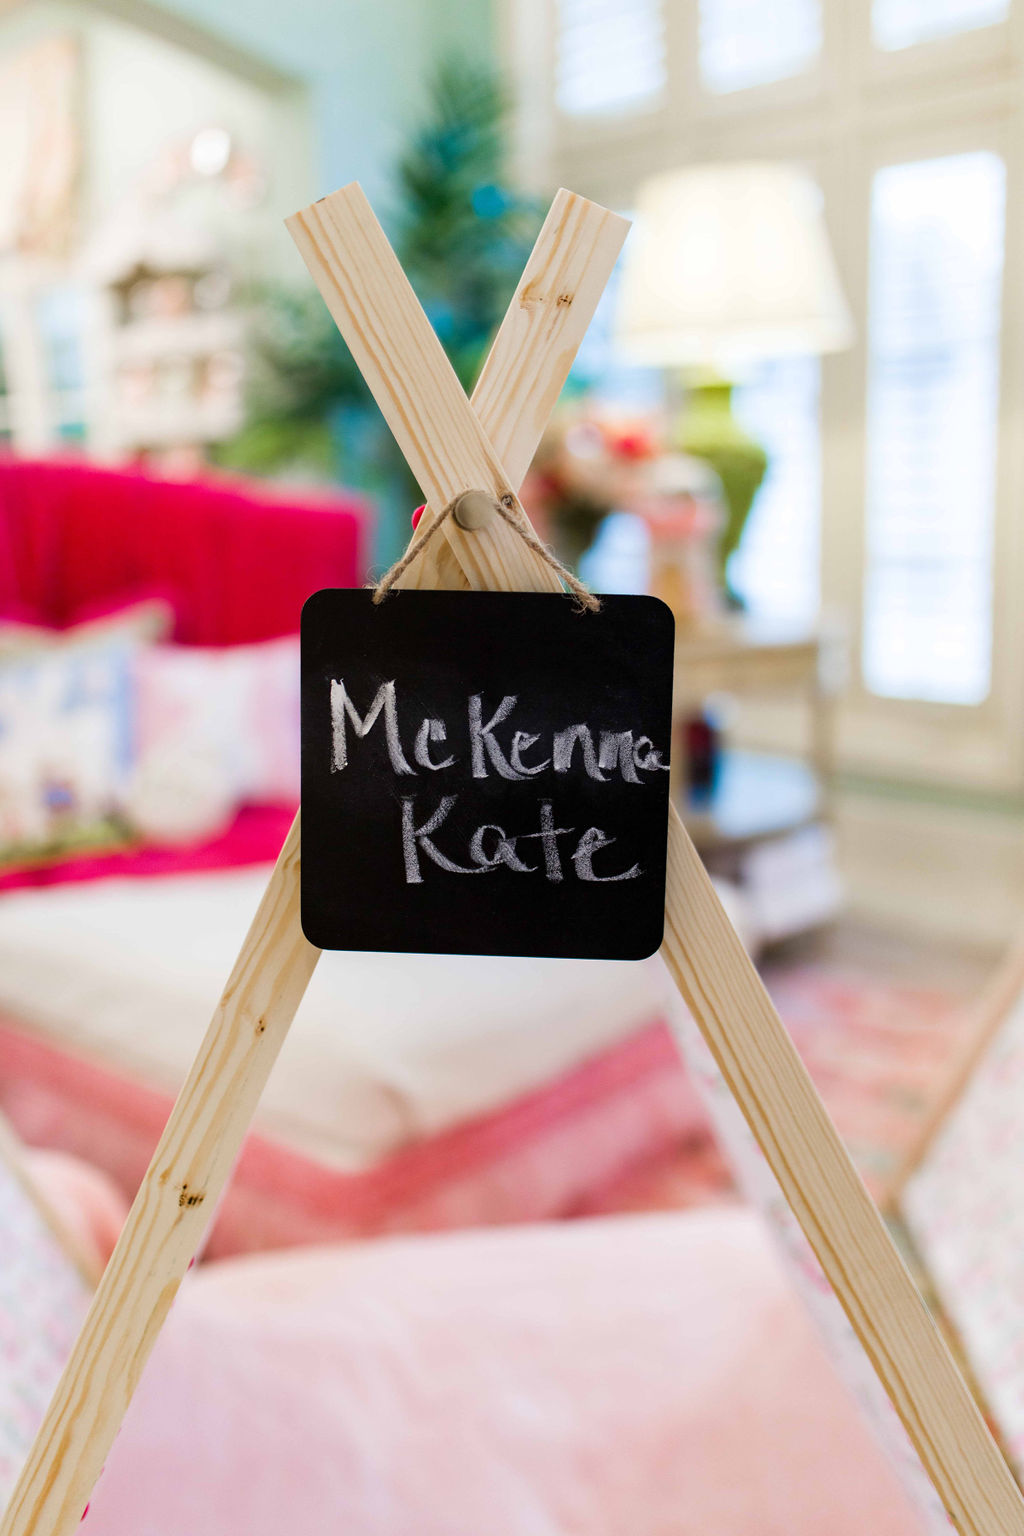 Turtle Creek Lane shows how to decorate for a unicorn birthday party with kids' teepees from Briarwood Design Co that have chalkboard signs with the girls names!